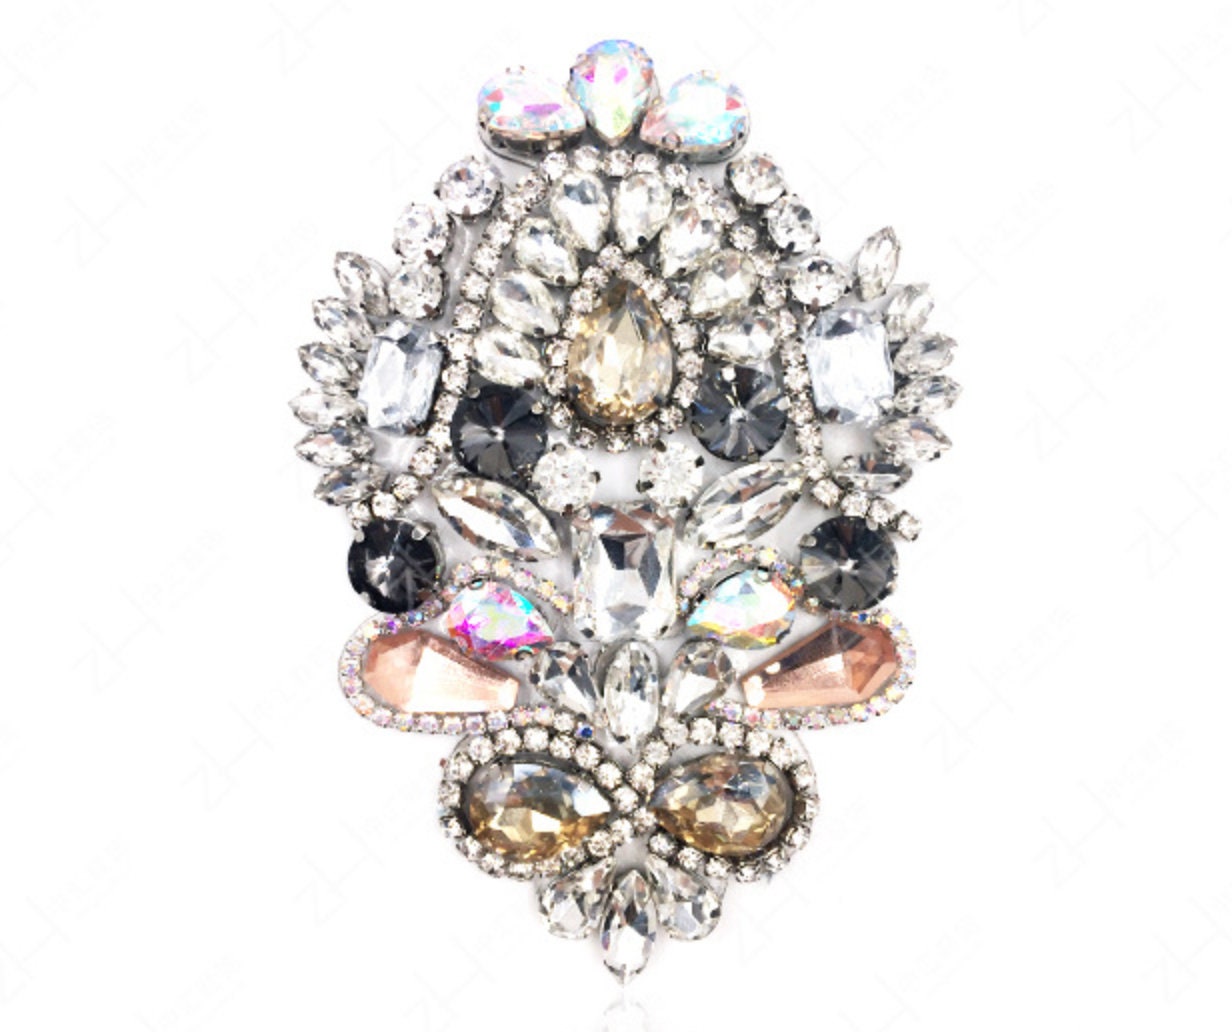 Shoes Bags Hair Accessories Crystals Sewing Applique V Shape Rhinstone Chain Applique Clear chain Crystal Applique Shoes Applique